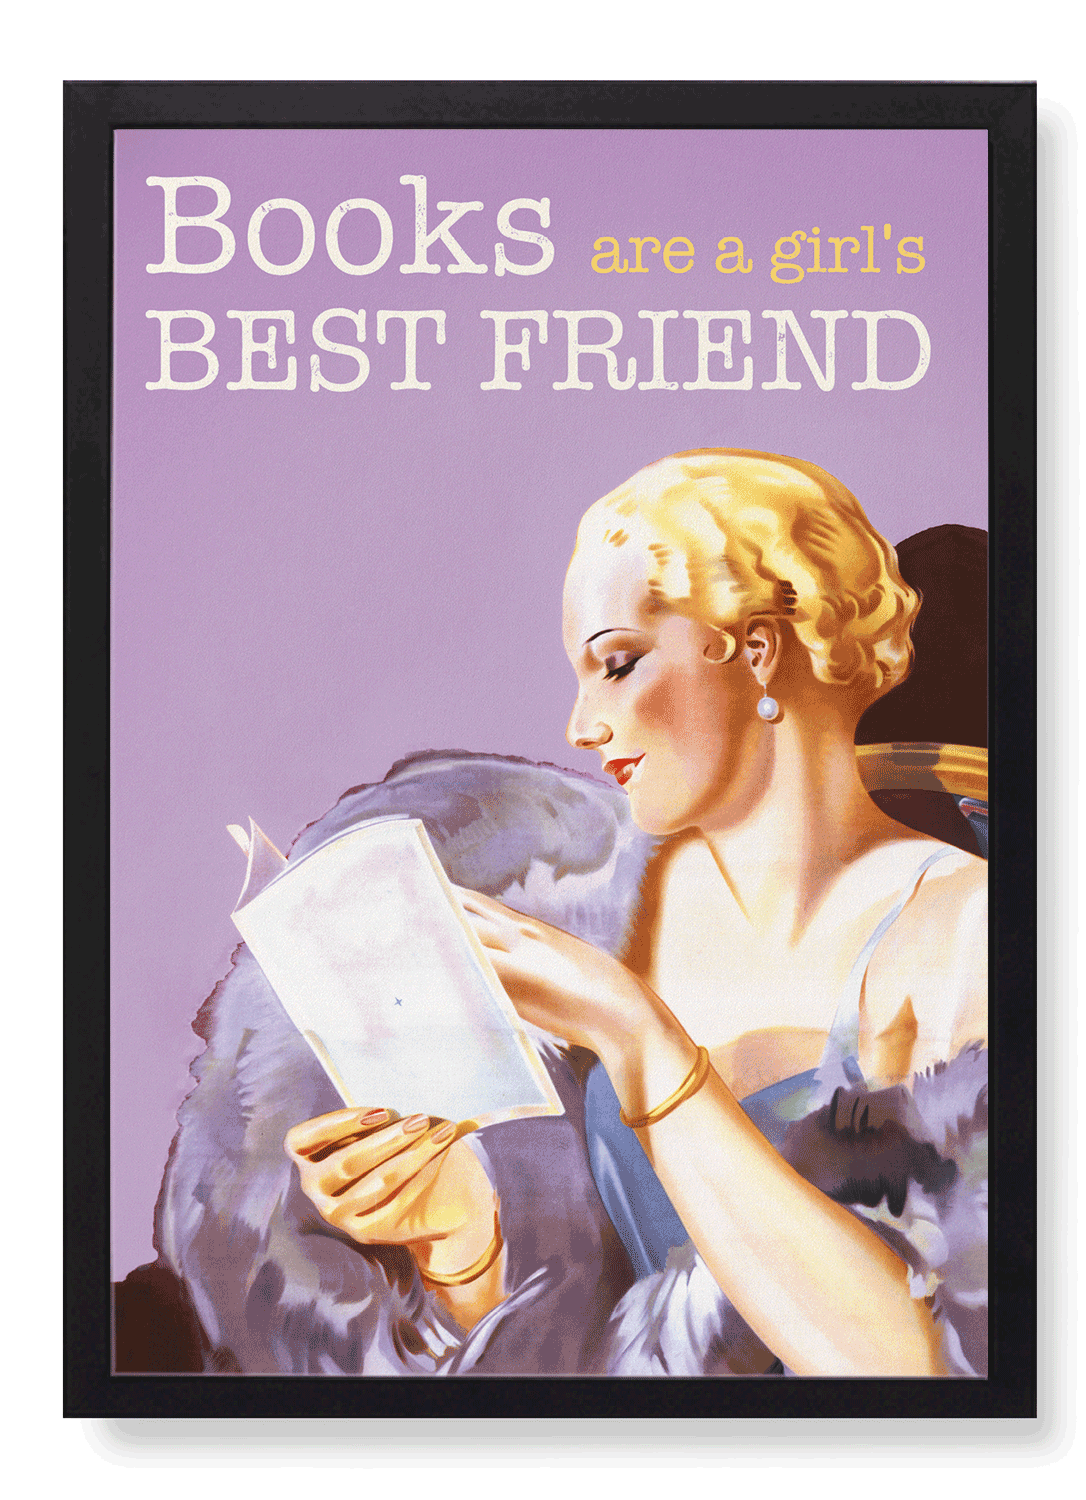 BOOKS ARE A GIRL’S BEST FRIEND